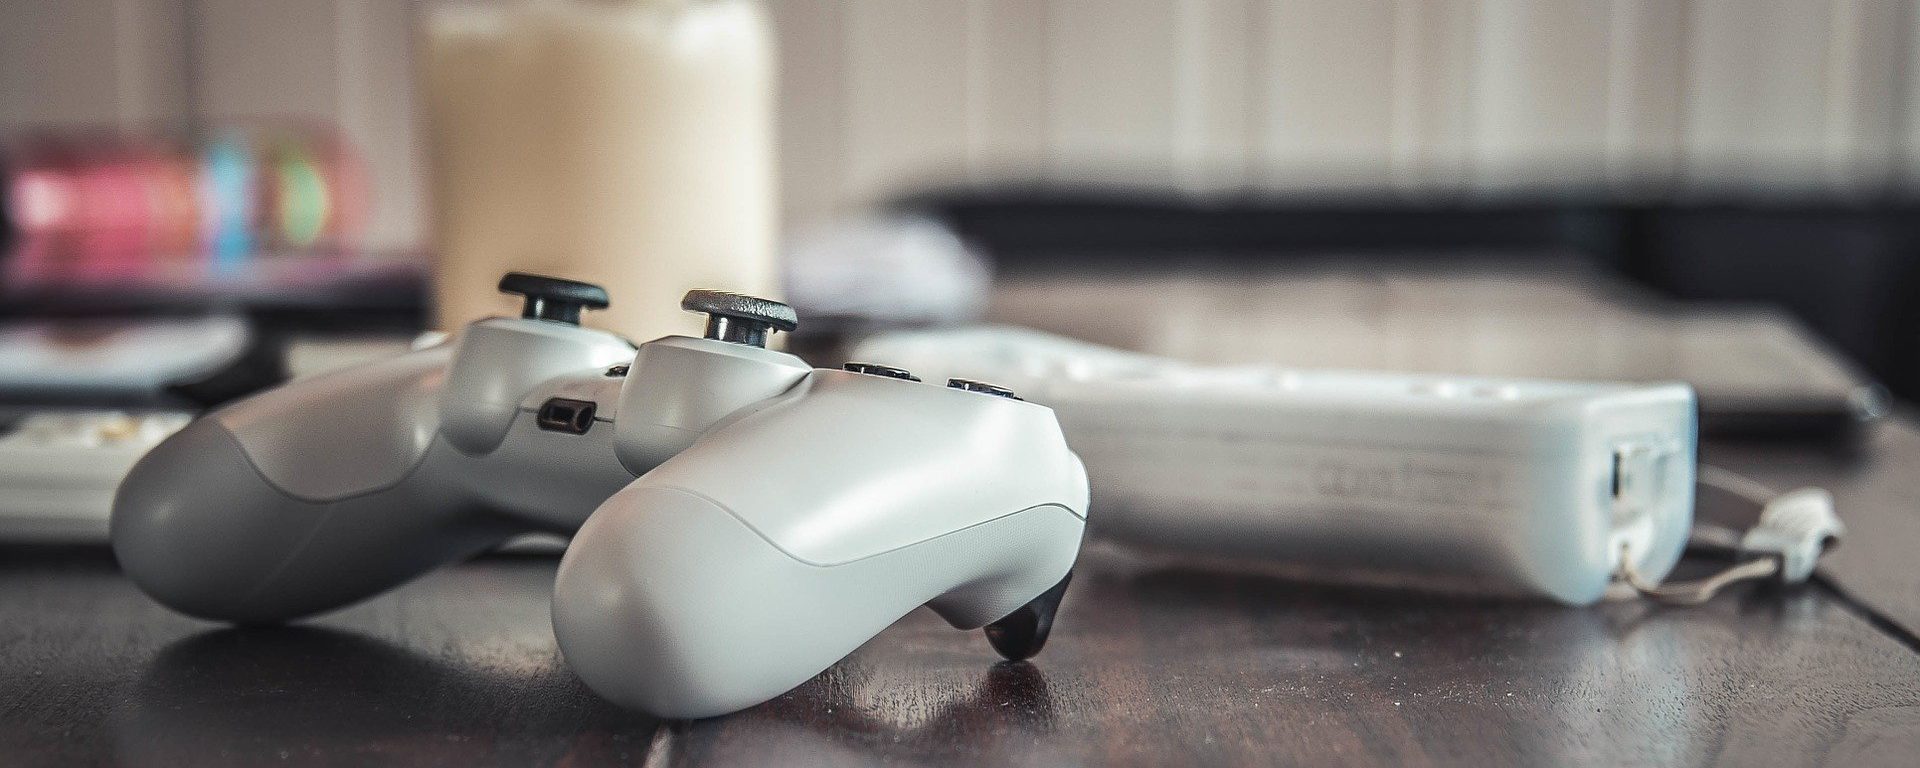 video game controllers with candles